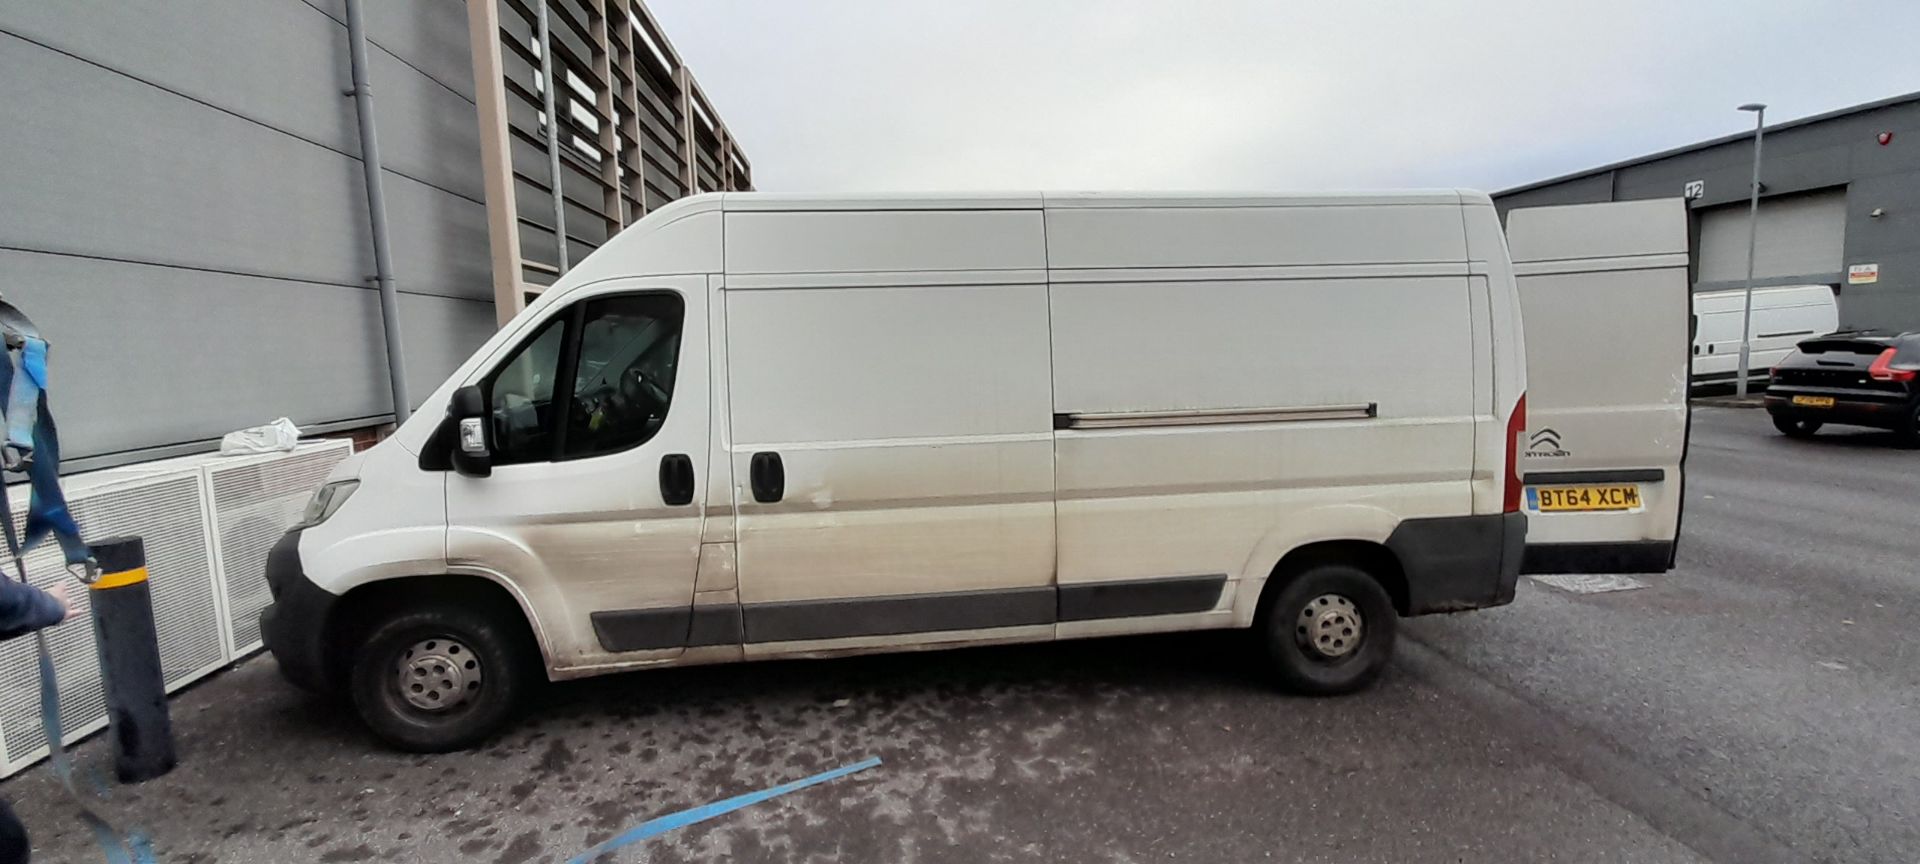 Citroen Relay Registration BT64 XCM, 104,109 miles - This vehicle does not have a V5C Document, the - Bild 4 aus 11